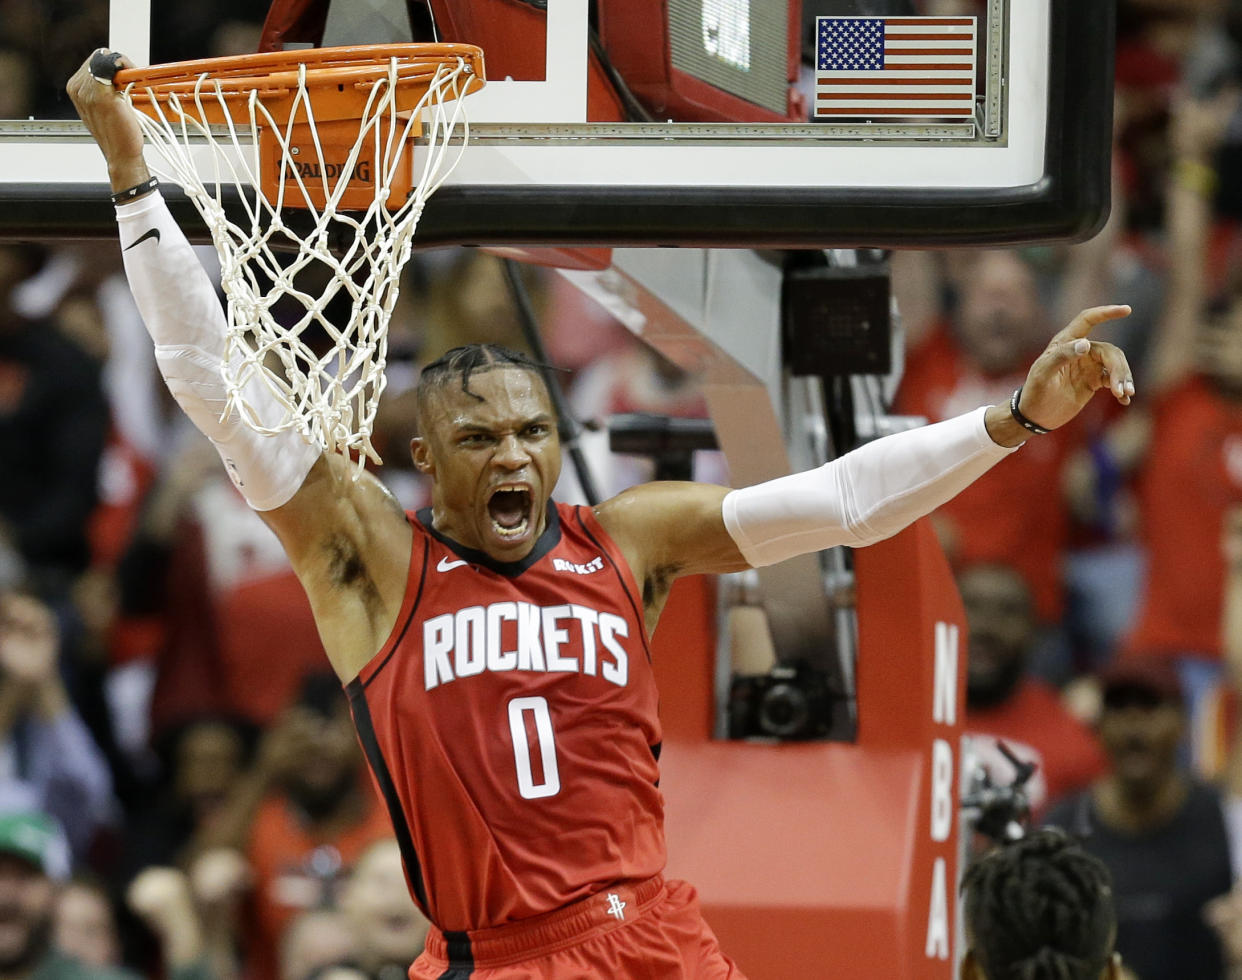 Houston Rockets guard Russell Westbrook celebrates his dunk during the second half of the teams NBA basketball game against the Milwaukee Bucks, Thursday, Oct. 24, 2019, in Houston. (AP Photo/Eric Christian Smith)